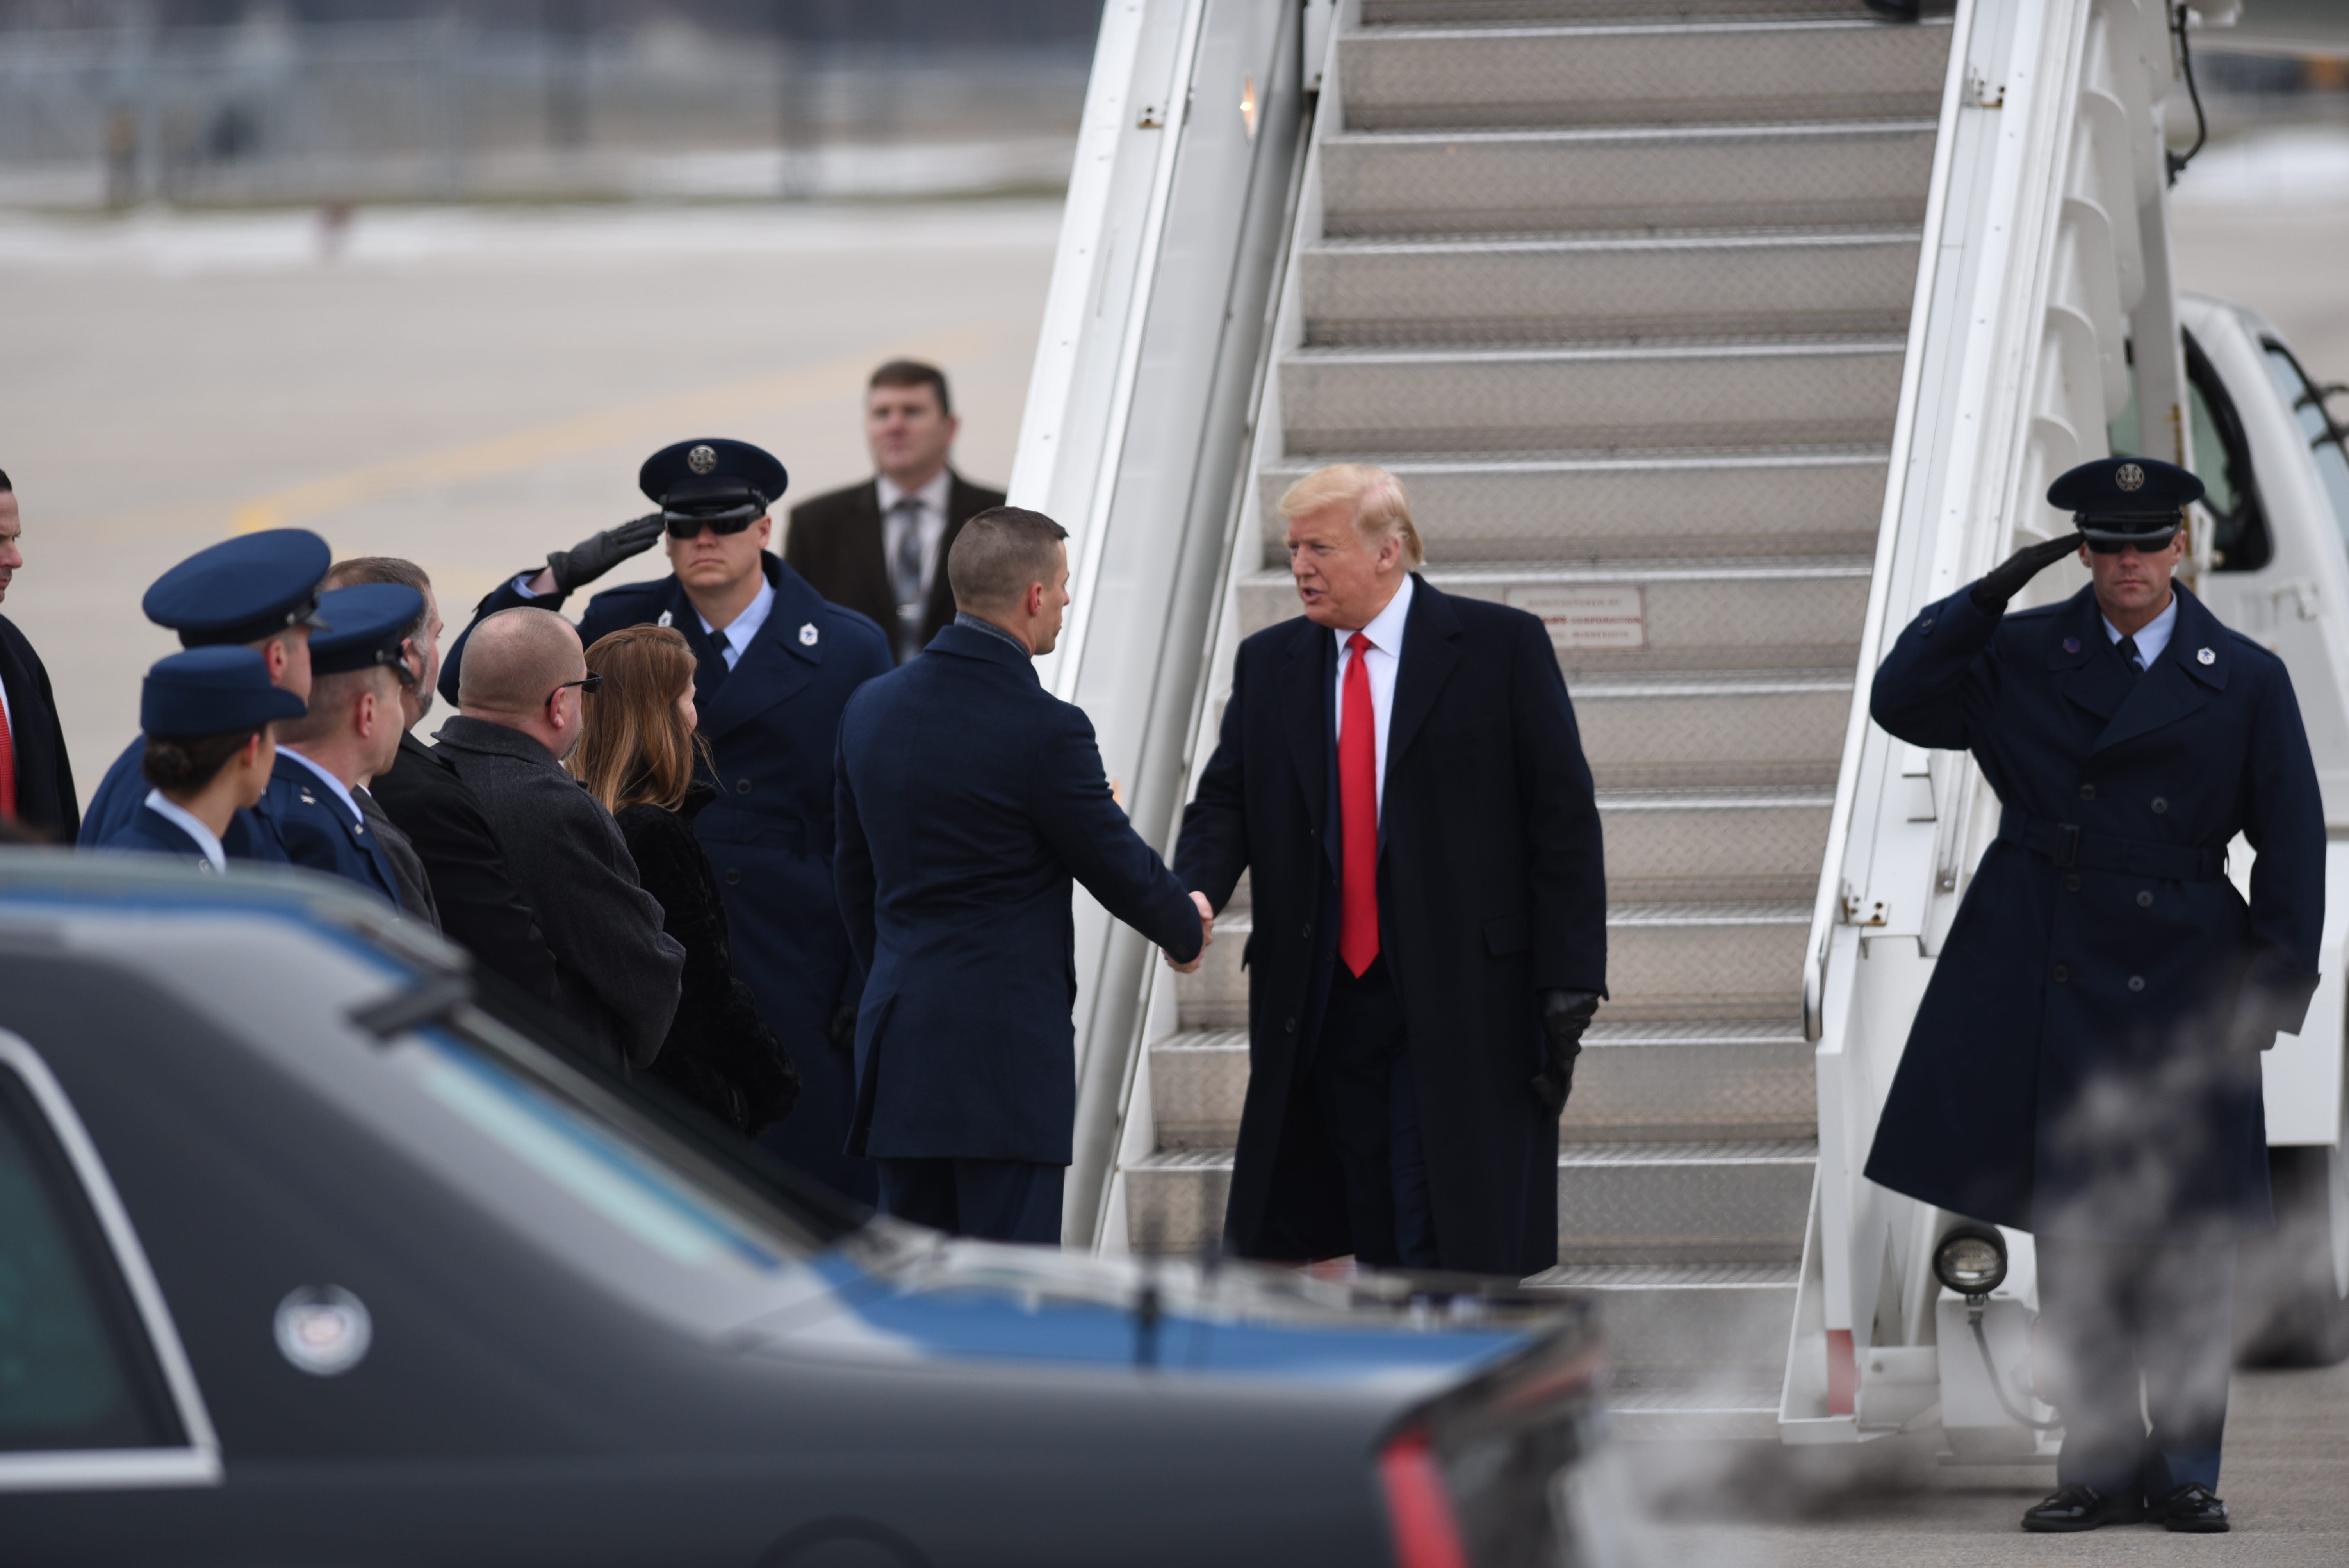 President Donald Trump is greeted by Michigan Speaker of the House Lee Chatfield upon arrival at Selfridge Air Base in Harrison Township on Thursday, Jan. 30, 2020.